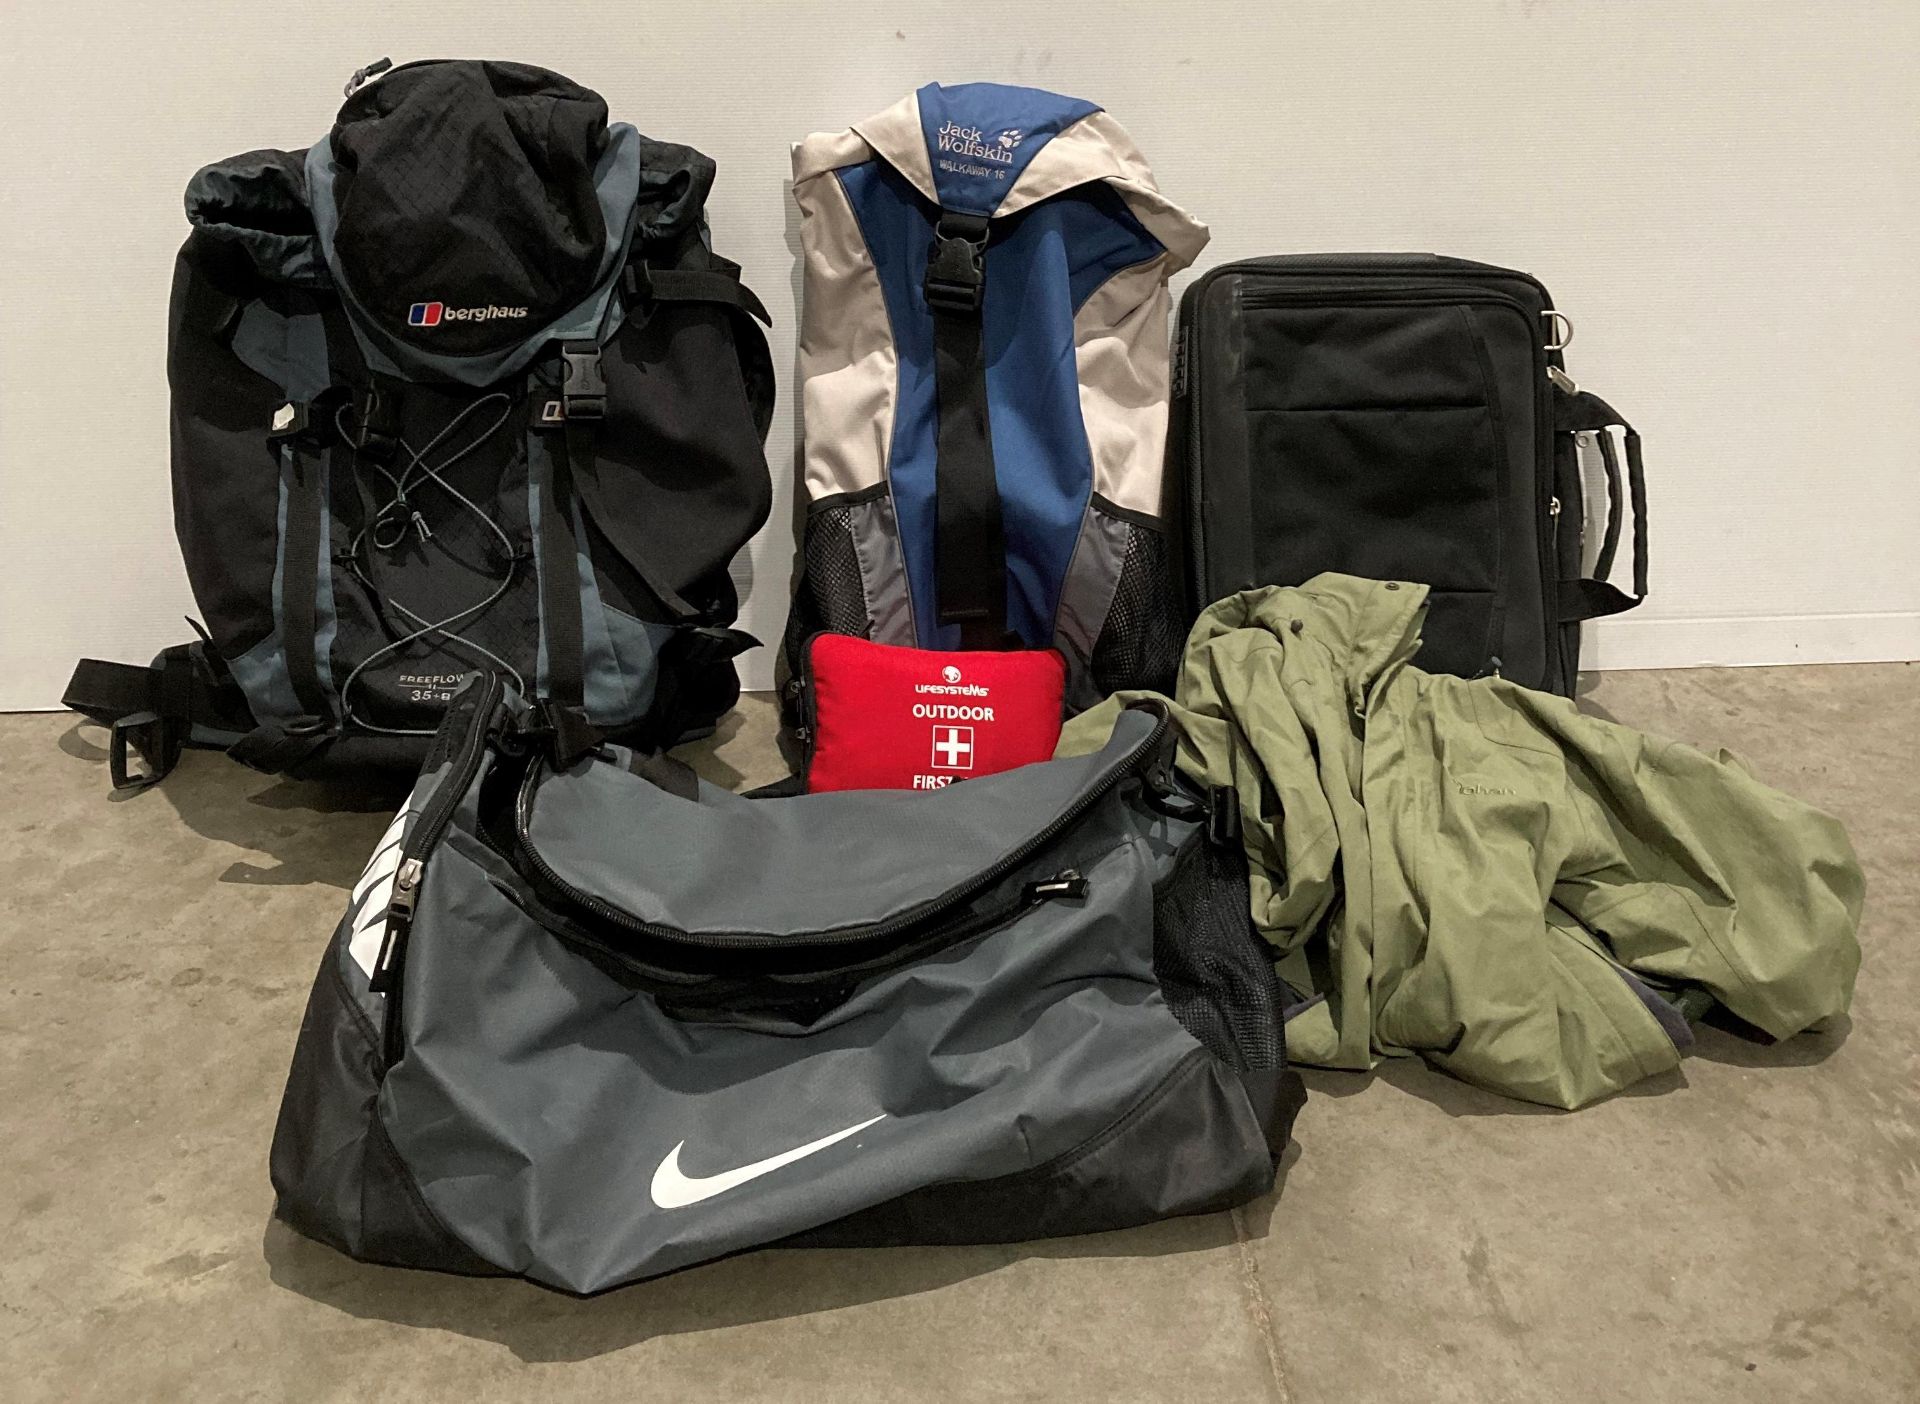 Berghaus Free Flow II 35+8 backpack, Nike bag and 2 other assorted bags,